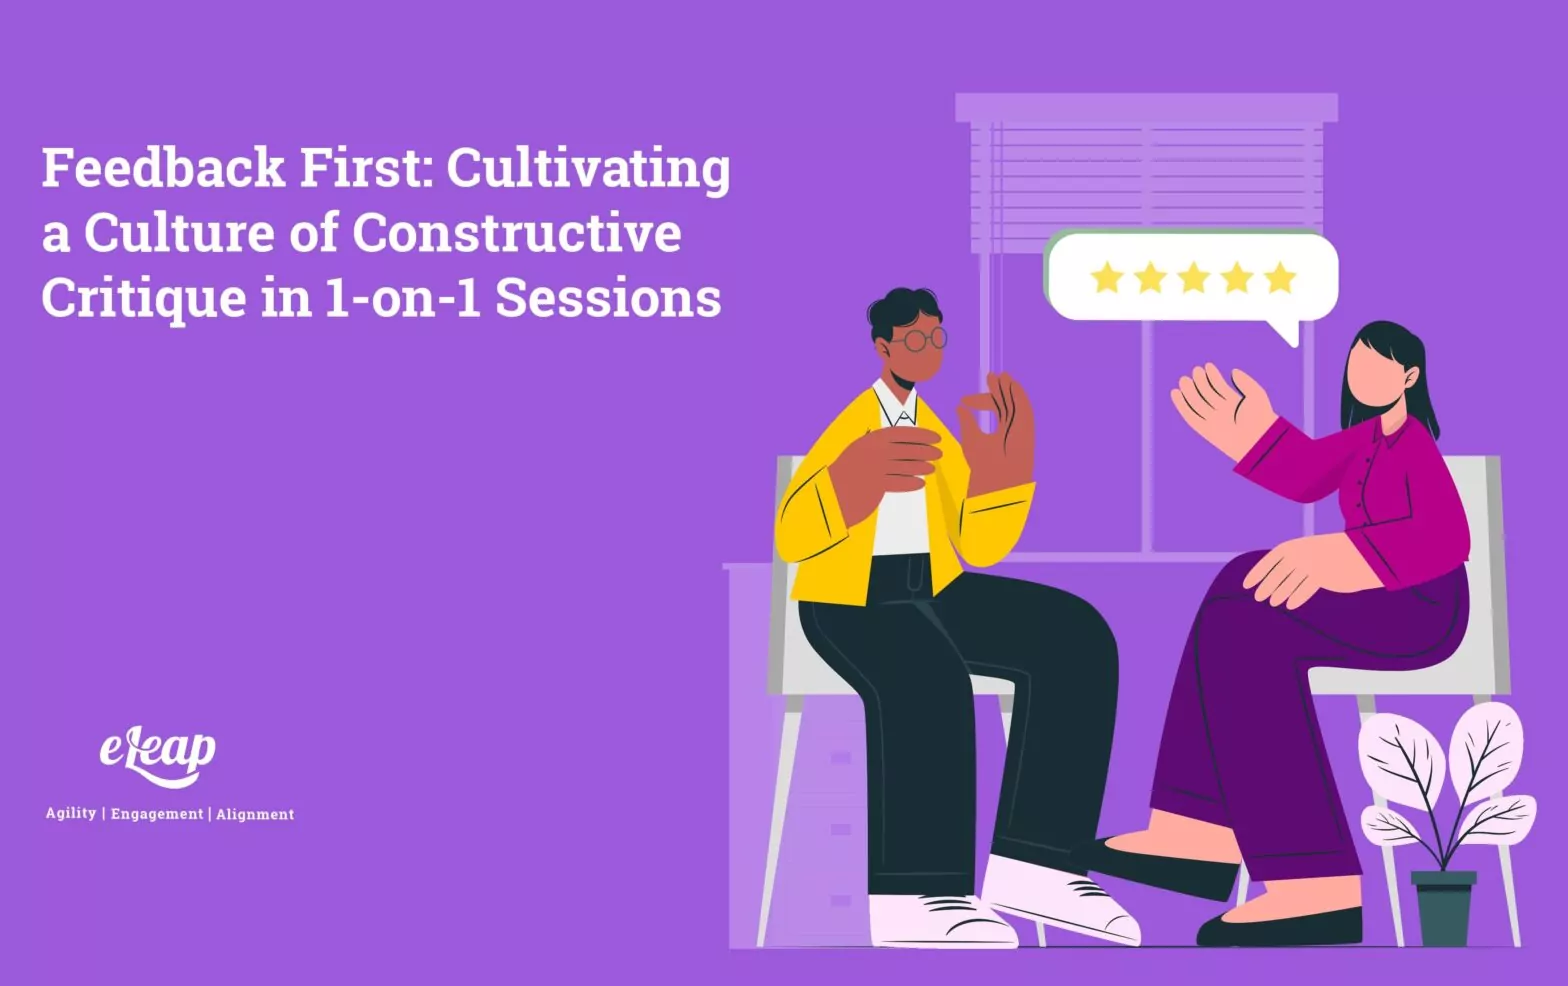 Feedback First: Cultivating a Culture of Constructive Critique in 1-on-1 Sessions